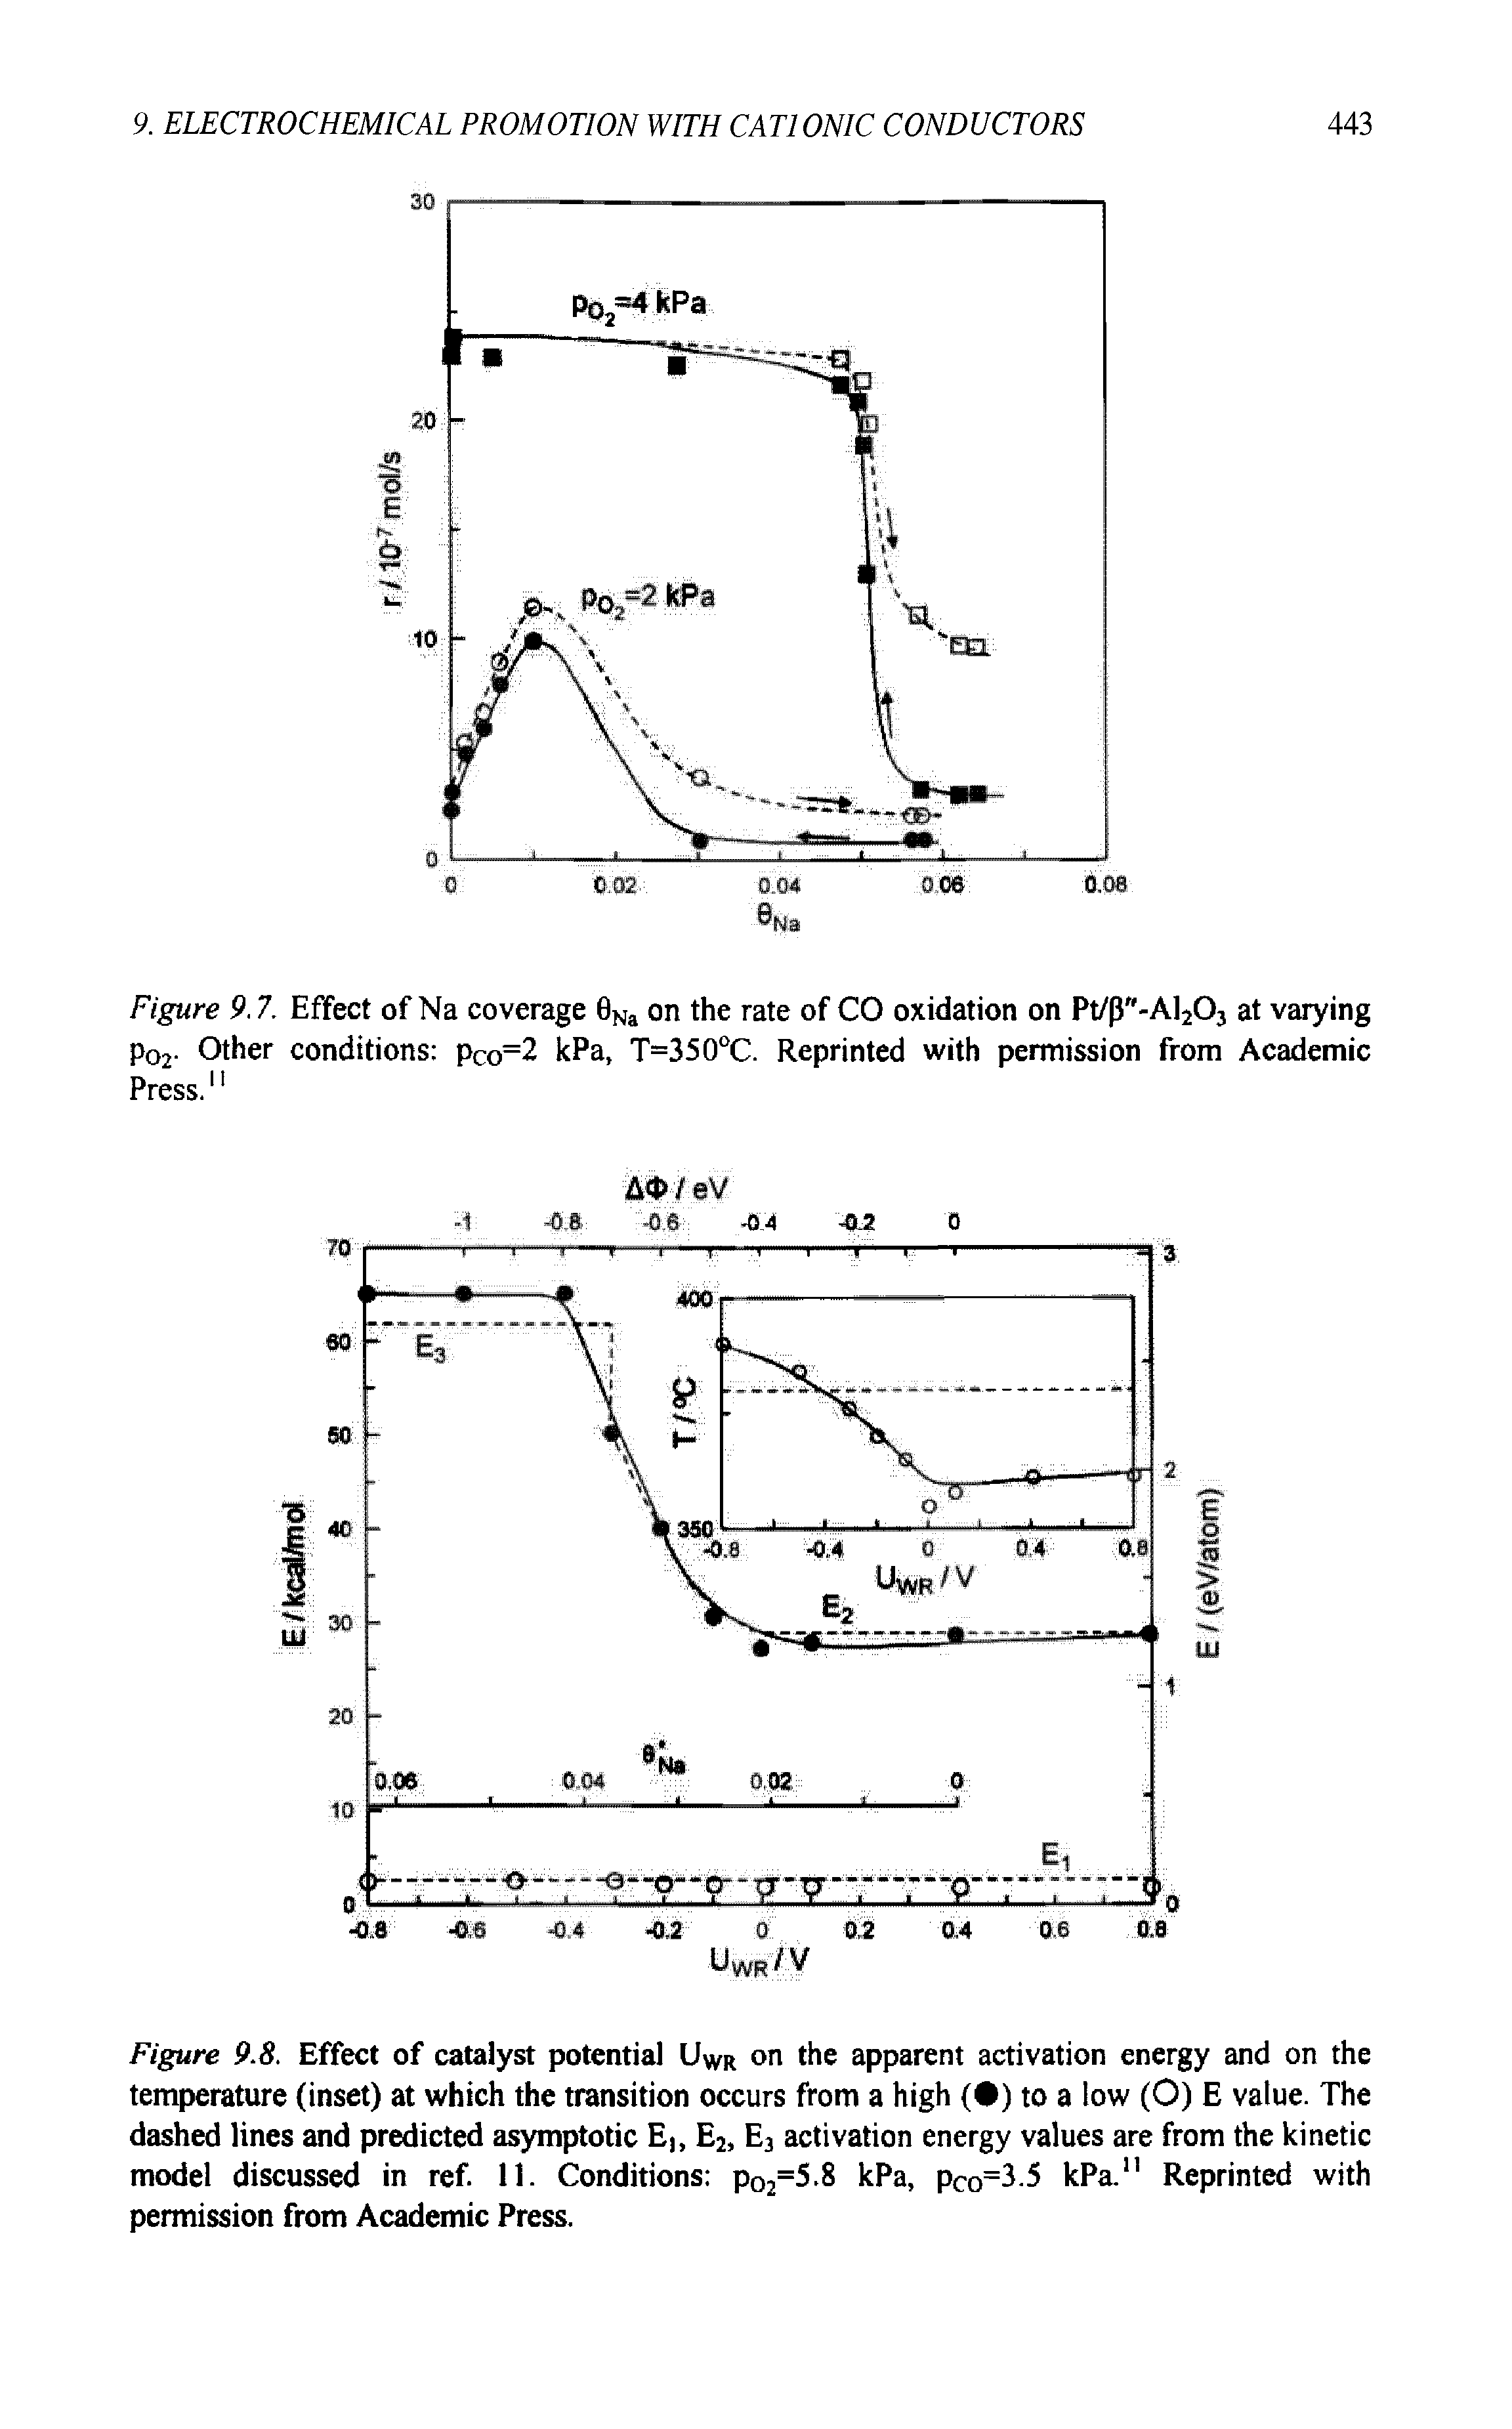 Figure 9.8. Effect of catalyst potential Uwr on the apparent activation energy and on the temperature (inset) at which the transition occurs from a high ( ) to a low (O) E value. The dashed lines and predicted asymptotic Ej, E2, E3 activation energy values are from the kinetic model discussed in ref. 11. Conditions p02=5.8 kPa, pCo=3-5 kPa.11 Reprinted with permission from Academic Press.